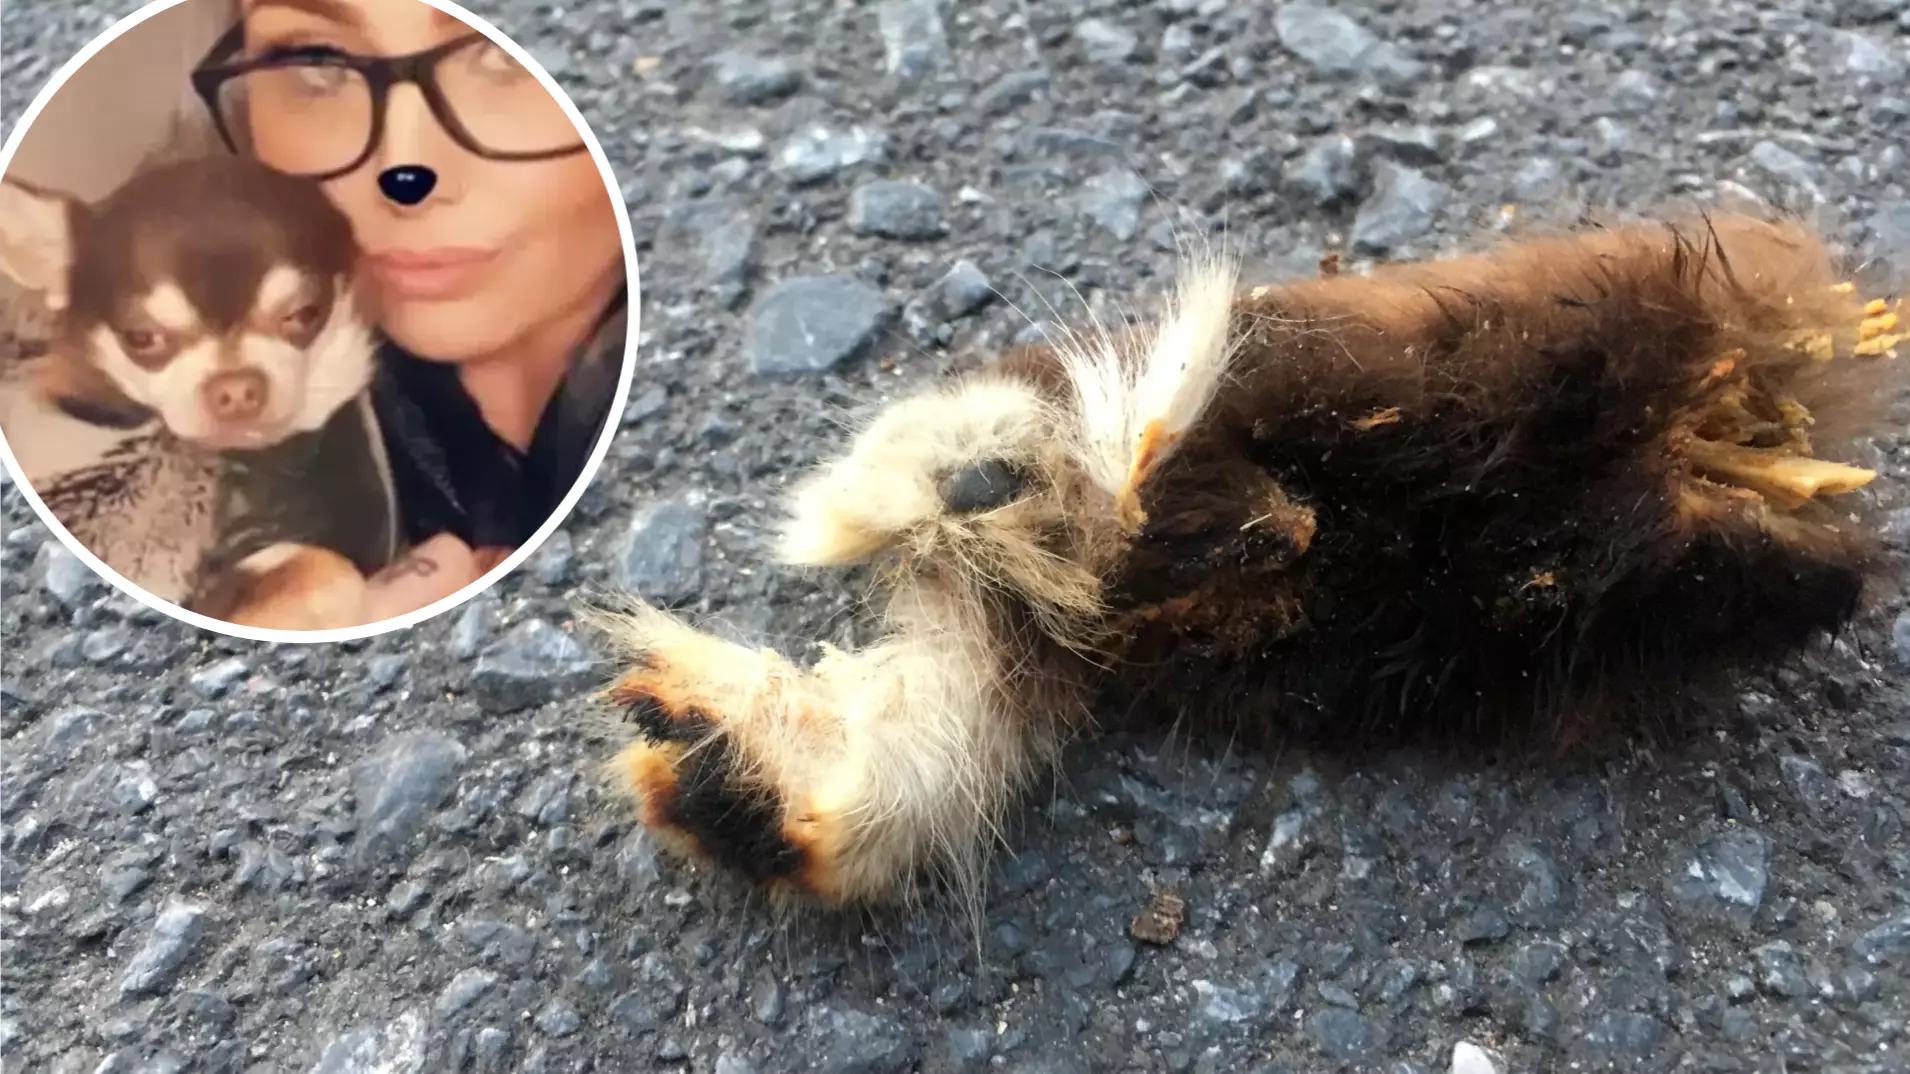 Seagull ‘Drops Severed Puppy Paw’ In Grim Find Believed To Be The Remains Of Gizmo